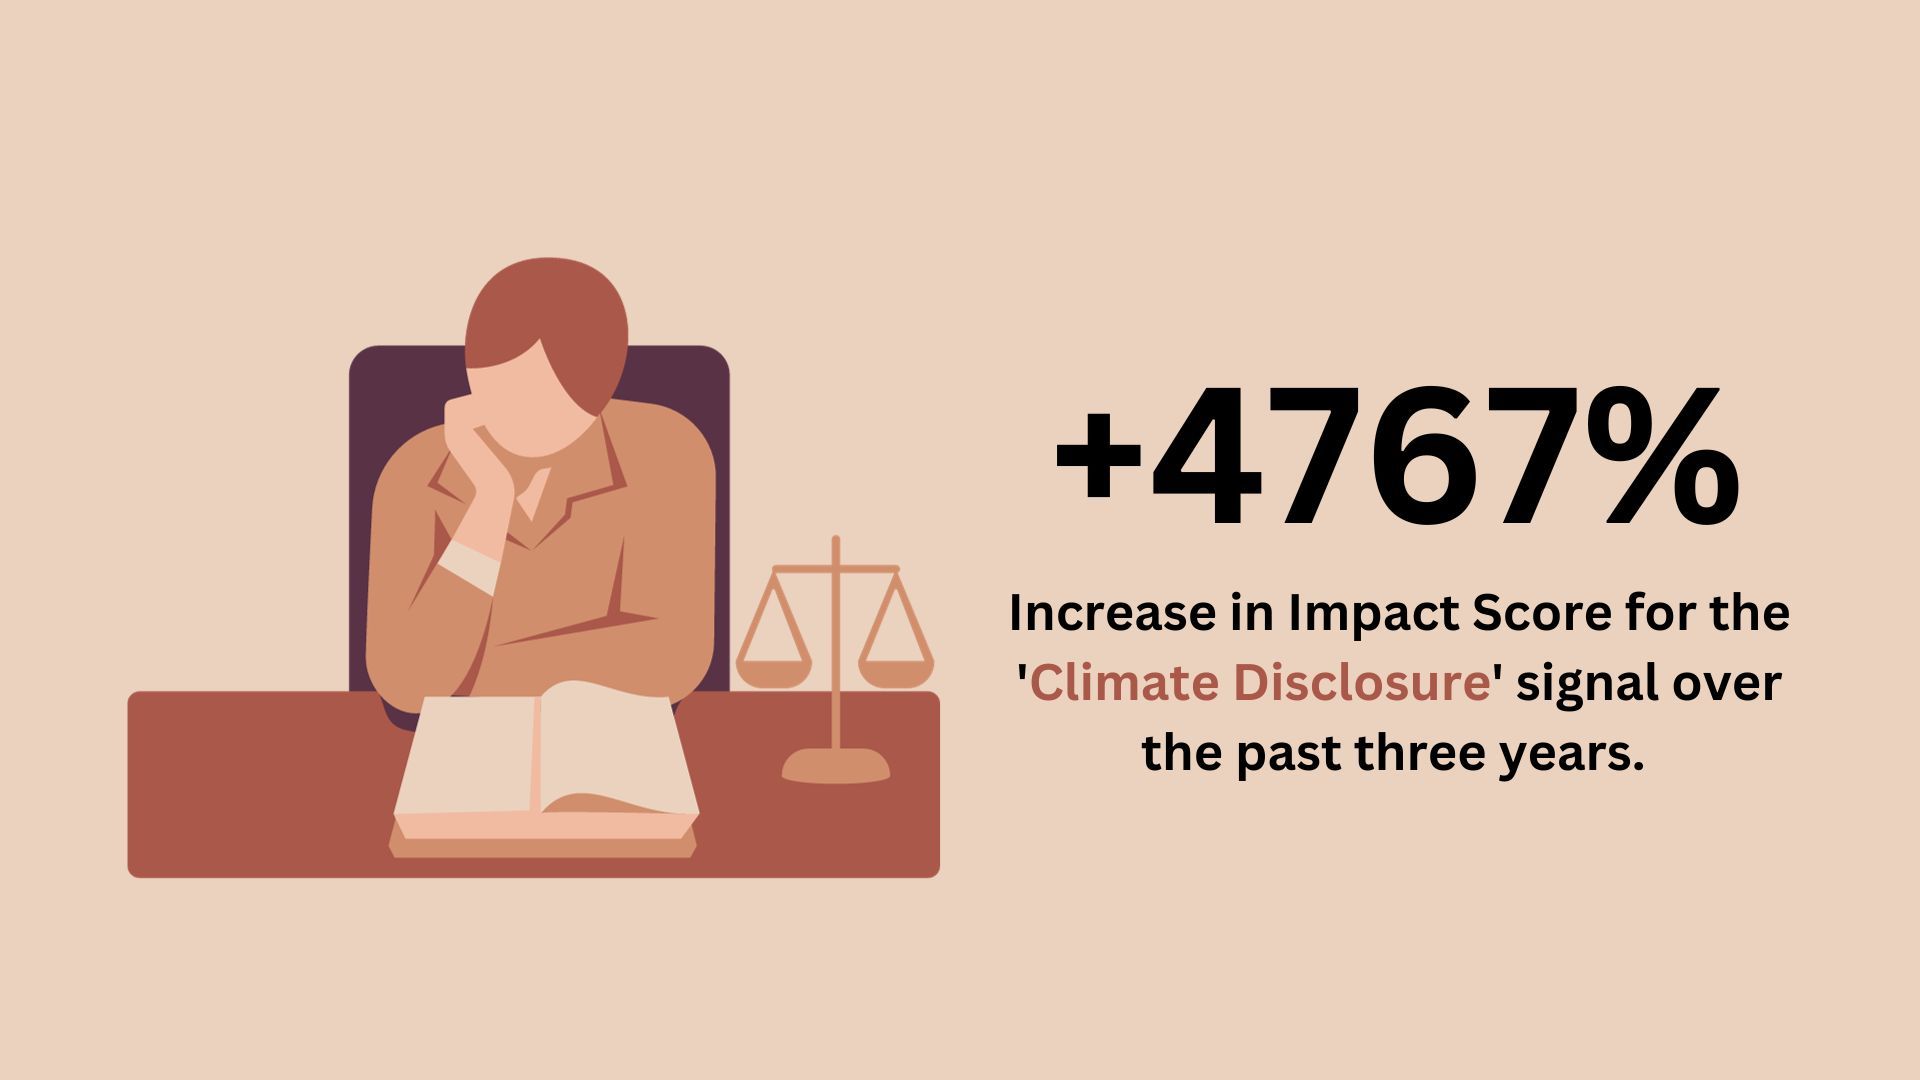 A New Era for Financial Transparency: How Climate Disclosure Laws Will Rock Corporate America